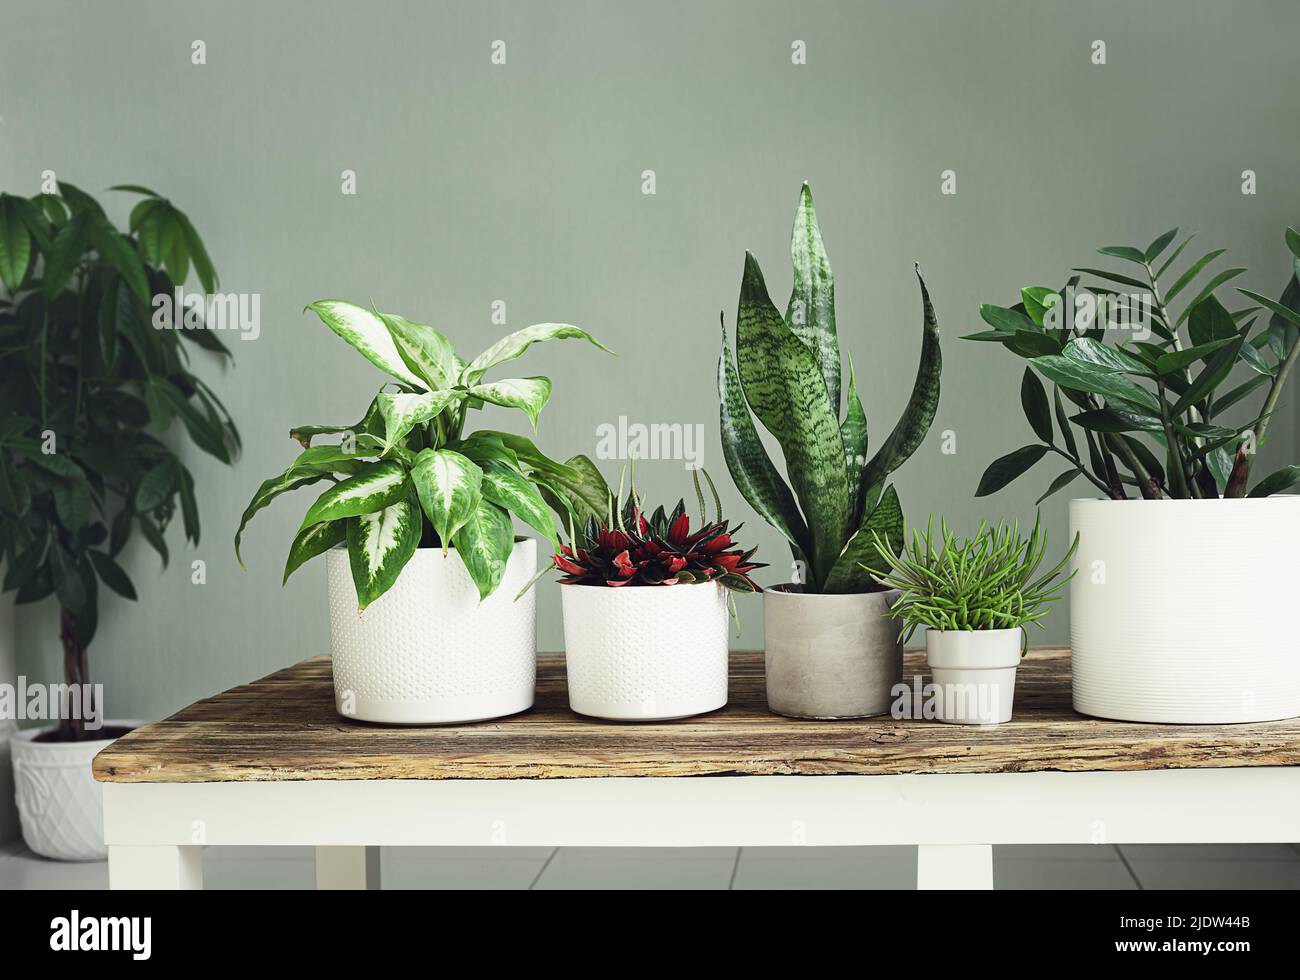 A variete of house plants on a wooden table, indoor garden concept Stock Photo